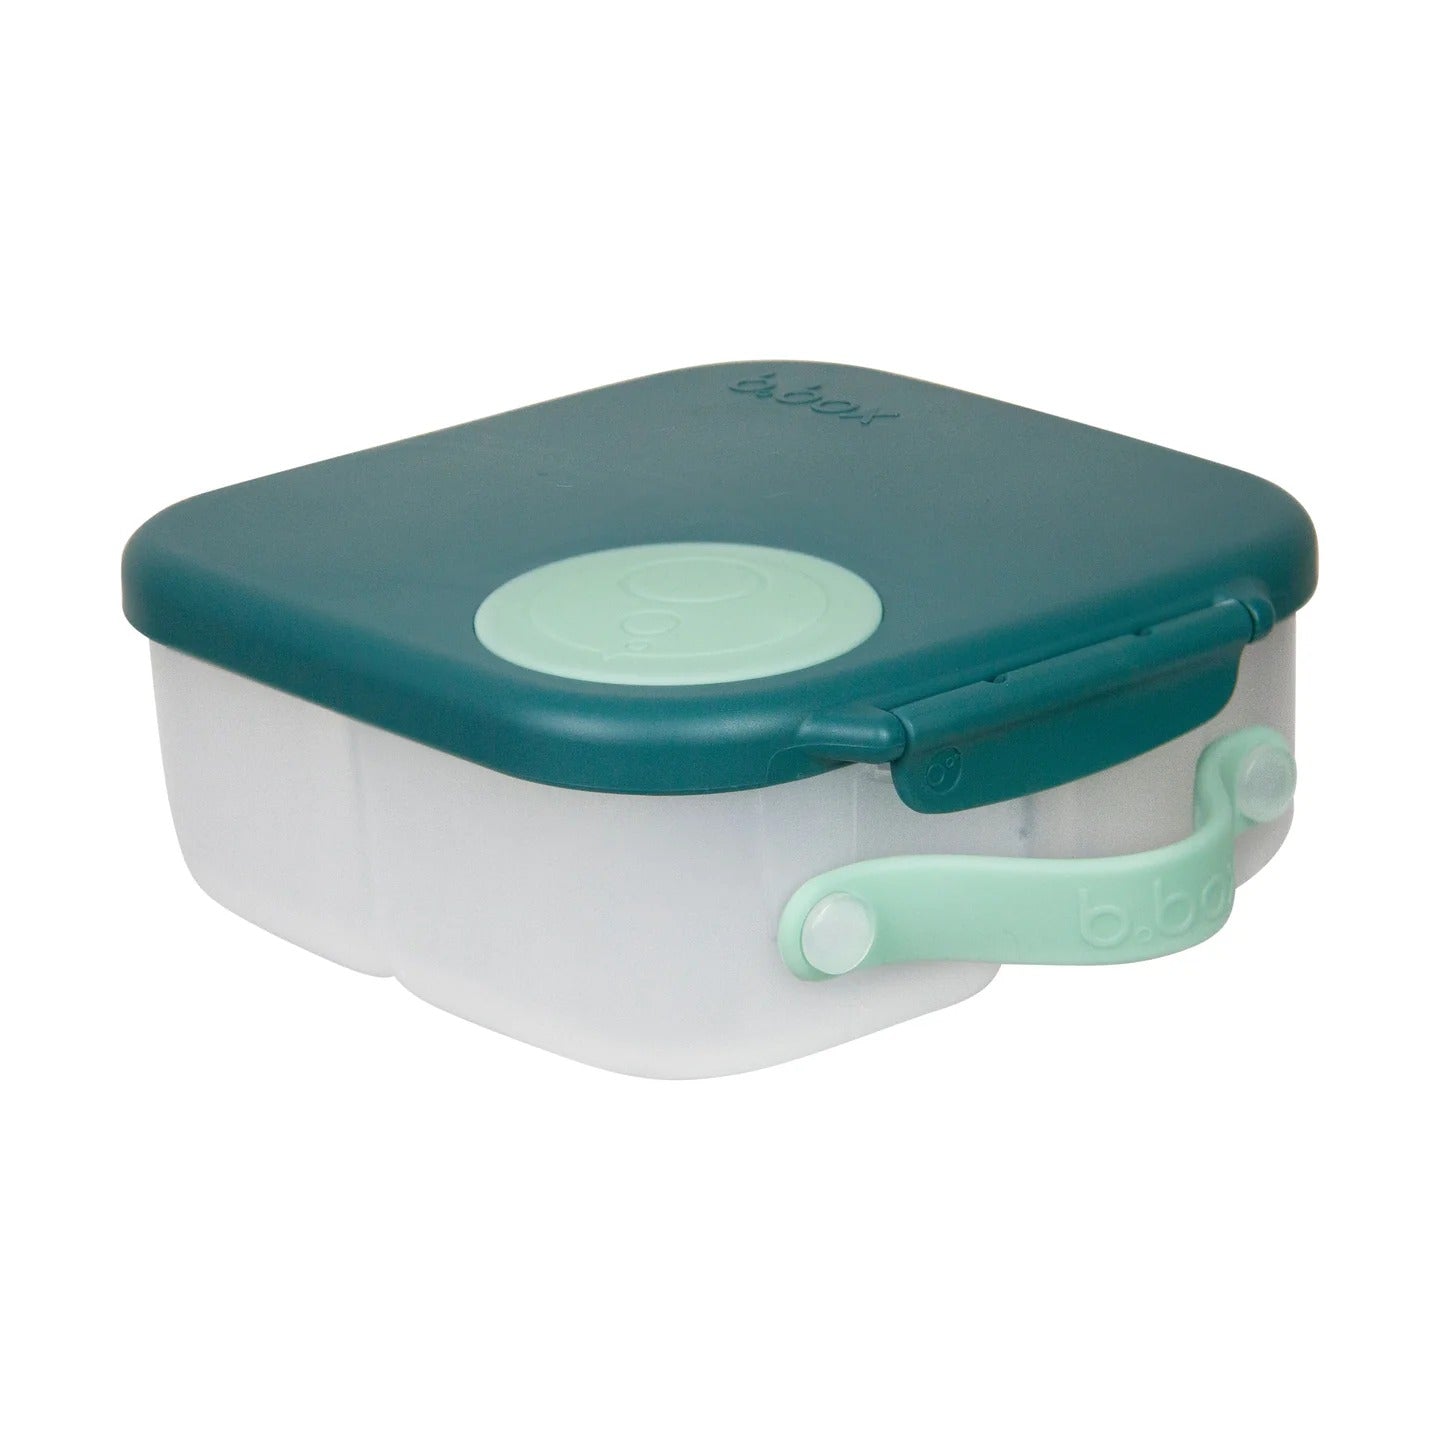 B.box Mini Lunchbox in Emerald Forest available at Bear & Moo